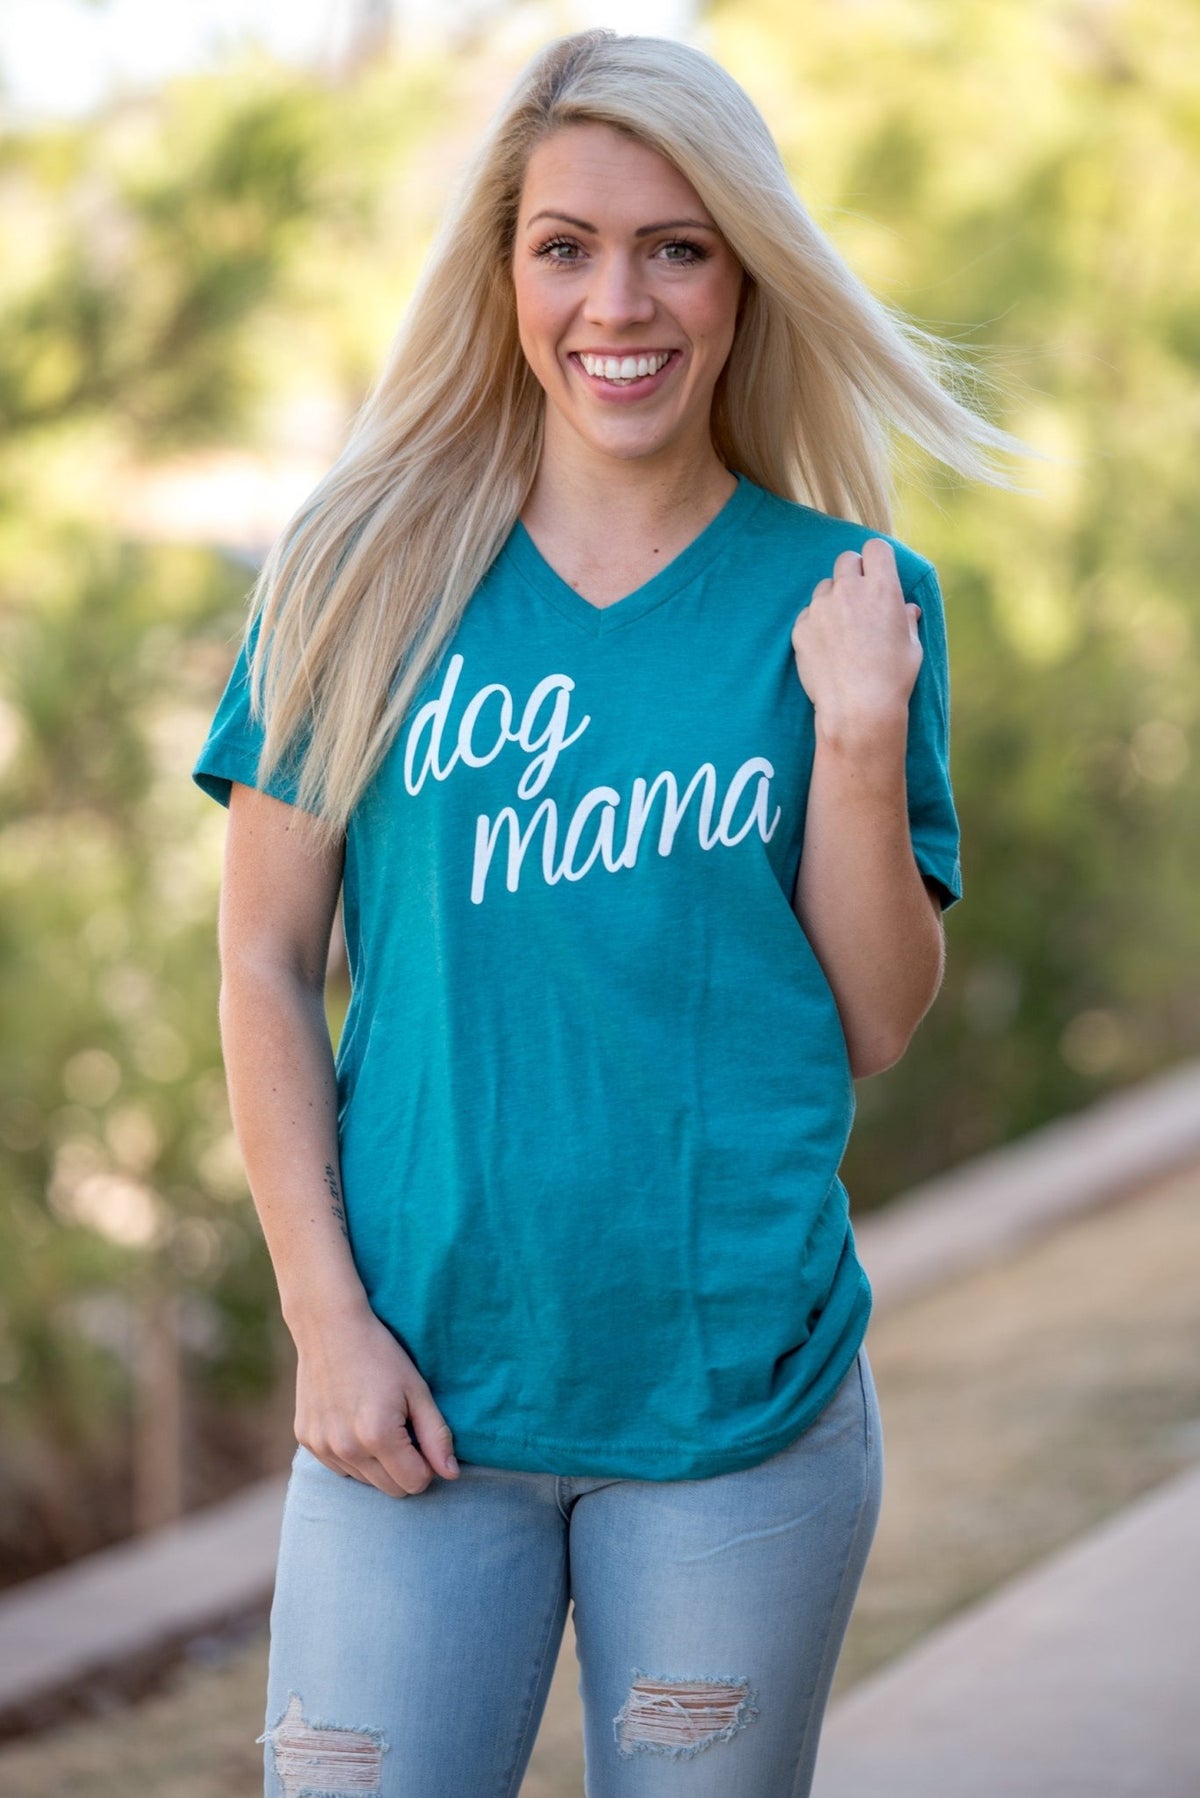 Dog mama script short sleeve v-neck t-shirt teal - Stylish T-shirts - Trendy Graphic T-Shirts and Tank Tops at Lush Fashion Lounge Boutique in Oklahoma City